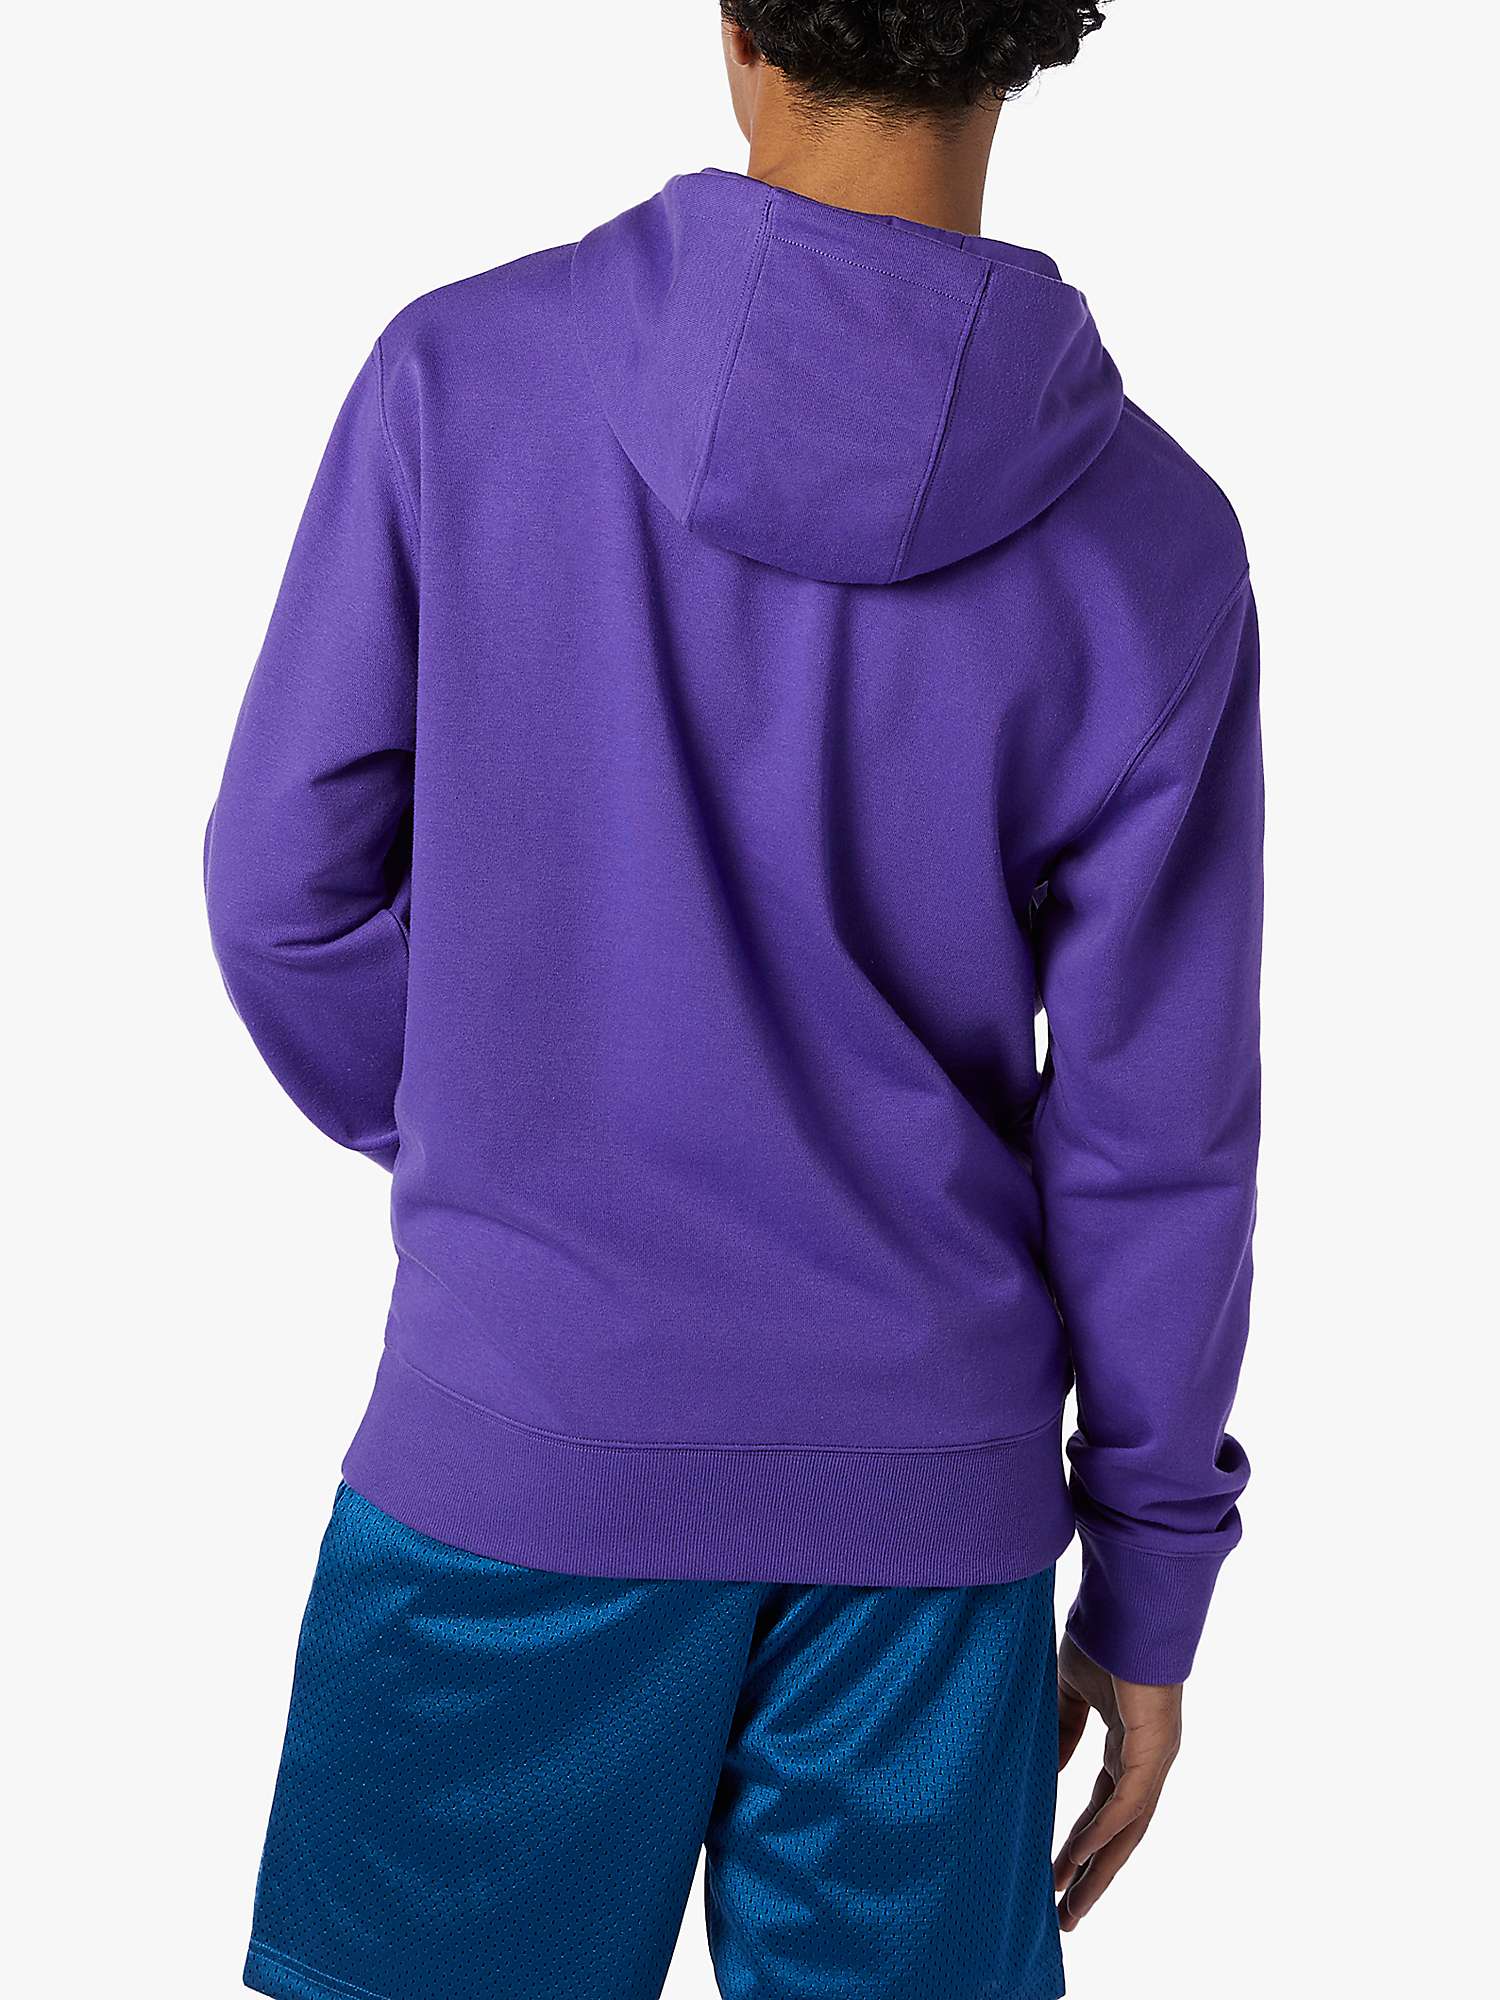 New Balance Embroidered Logo Hoodie, Purple at John Lewis & Partners